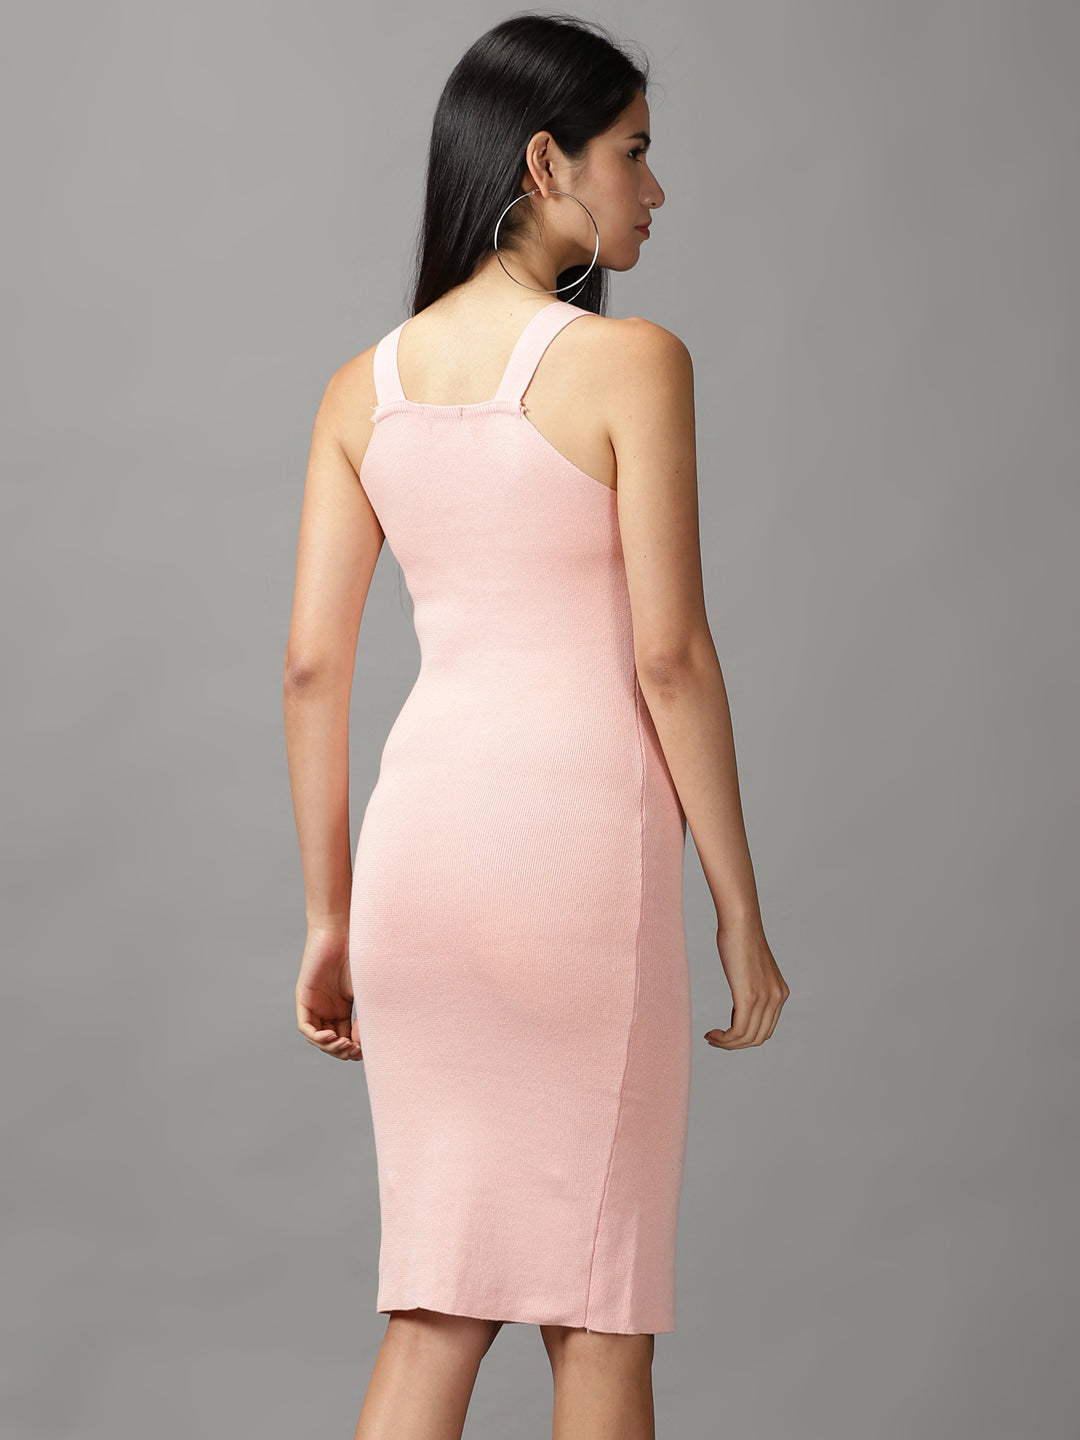 Women's Pink Solid Bodycon Dress